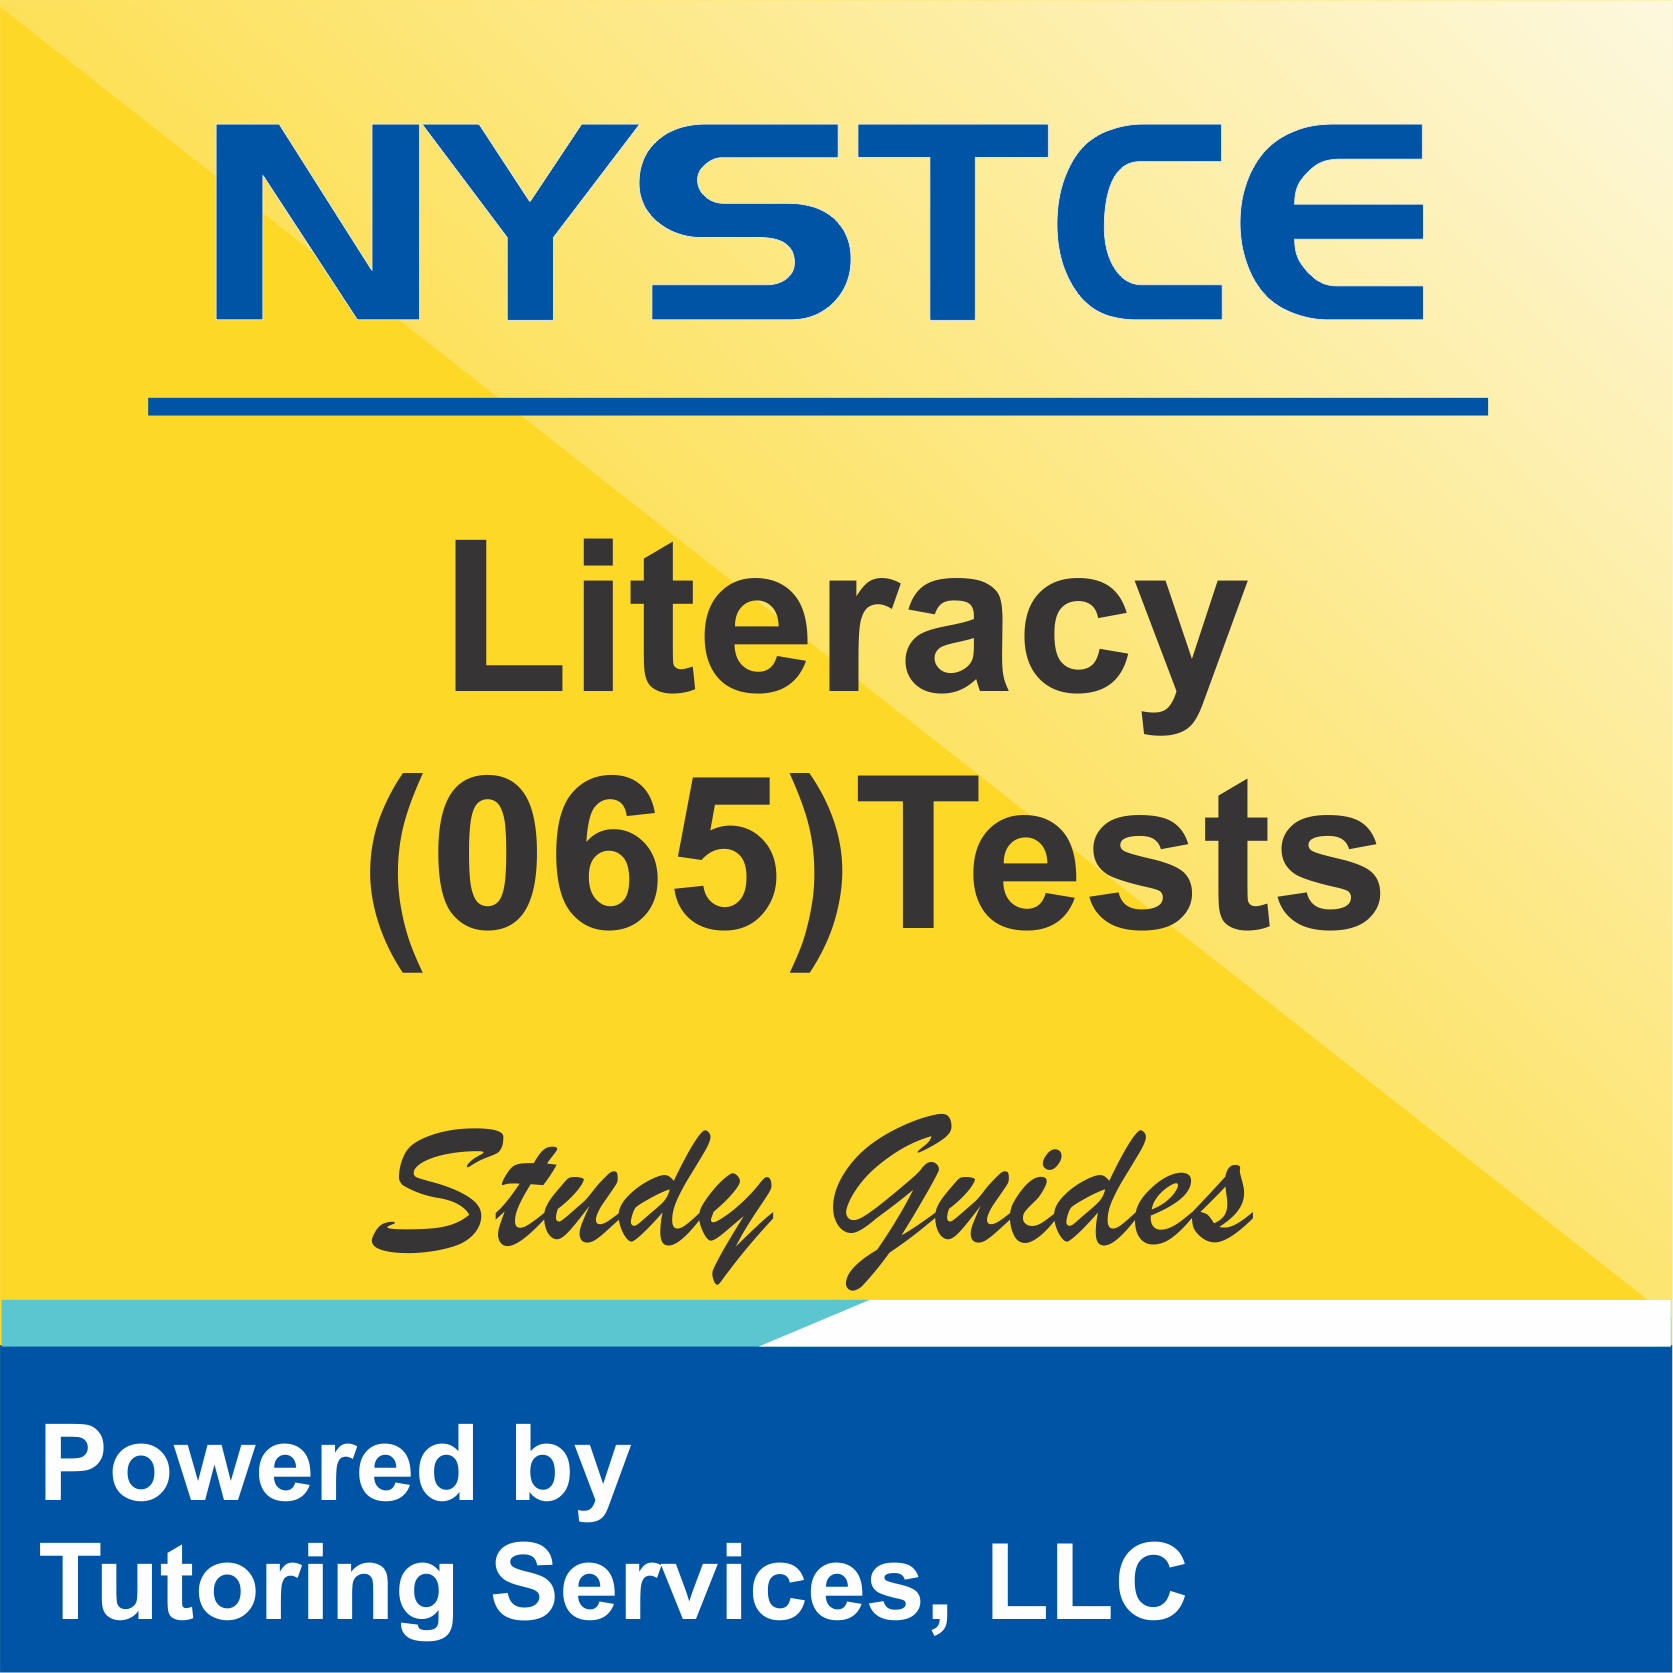 NYSTCE New York Public Teaching Licensure Test Details for Literacy 065